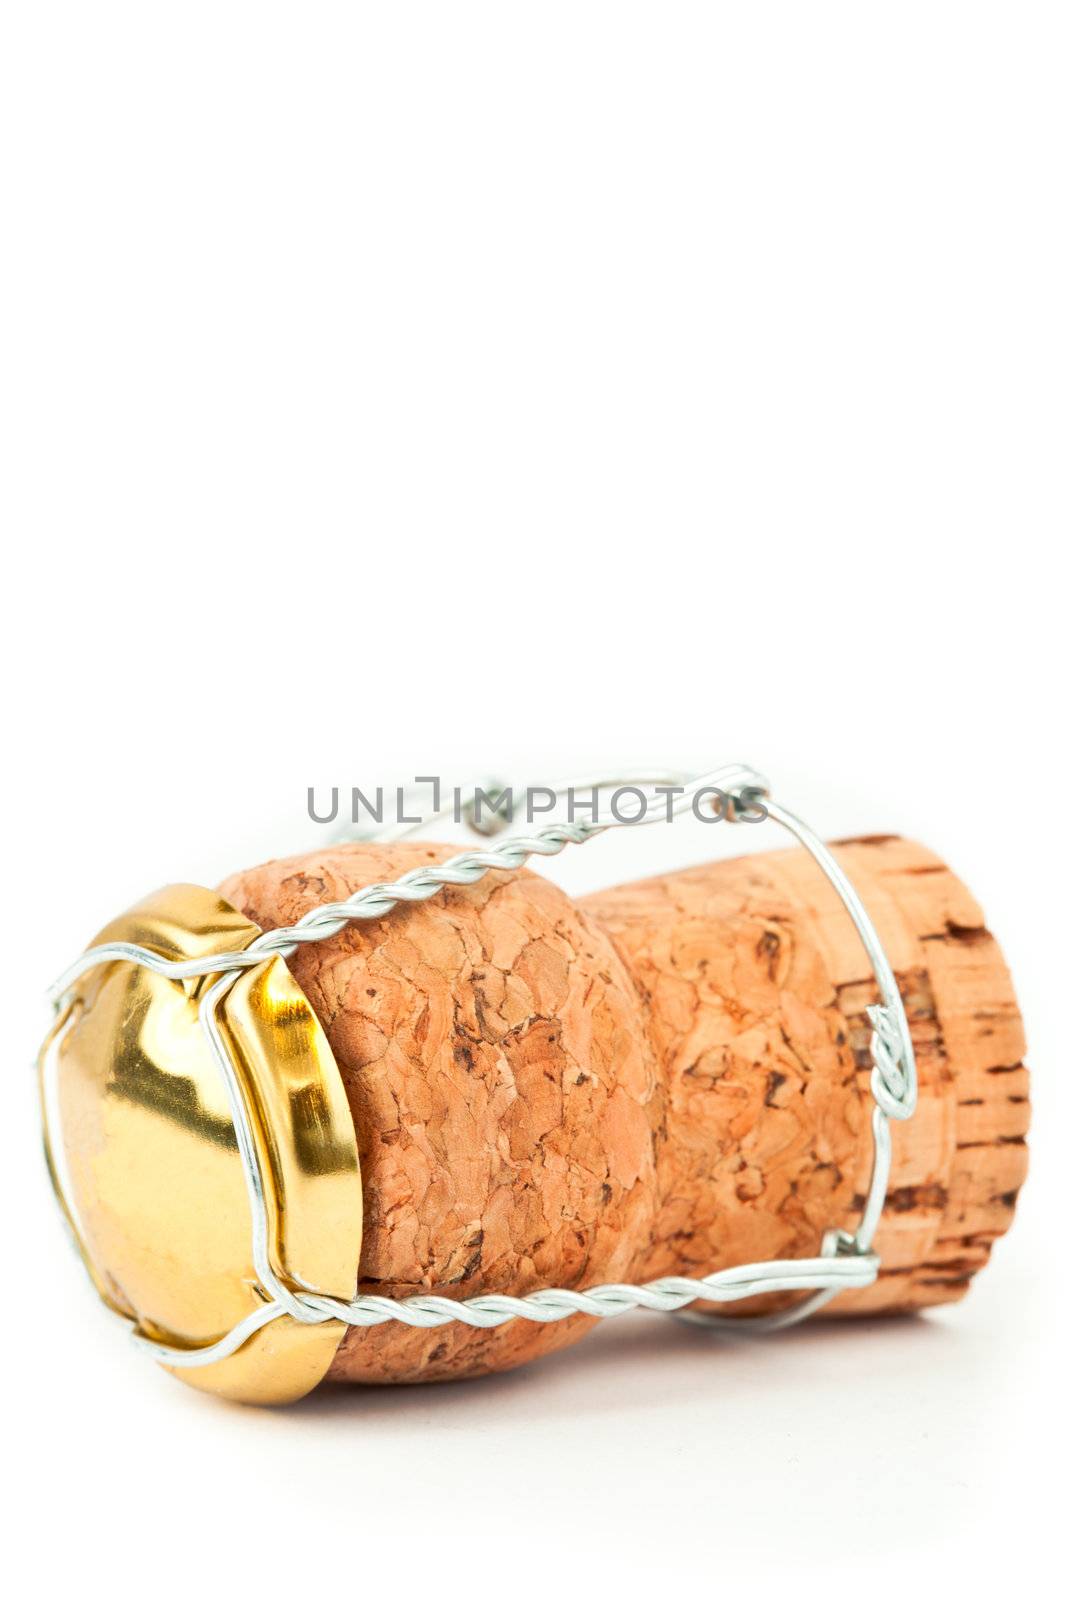 Close up of a cork with iron wire by Wavebreakmedia